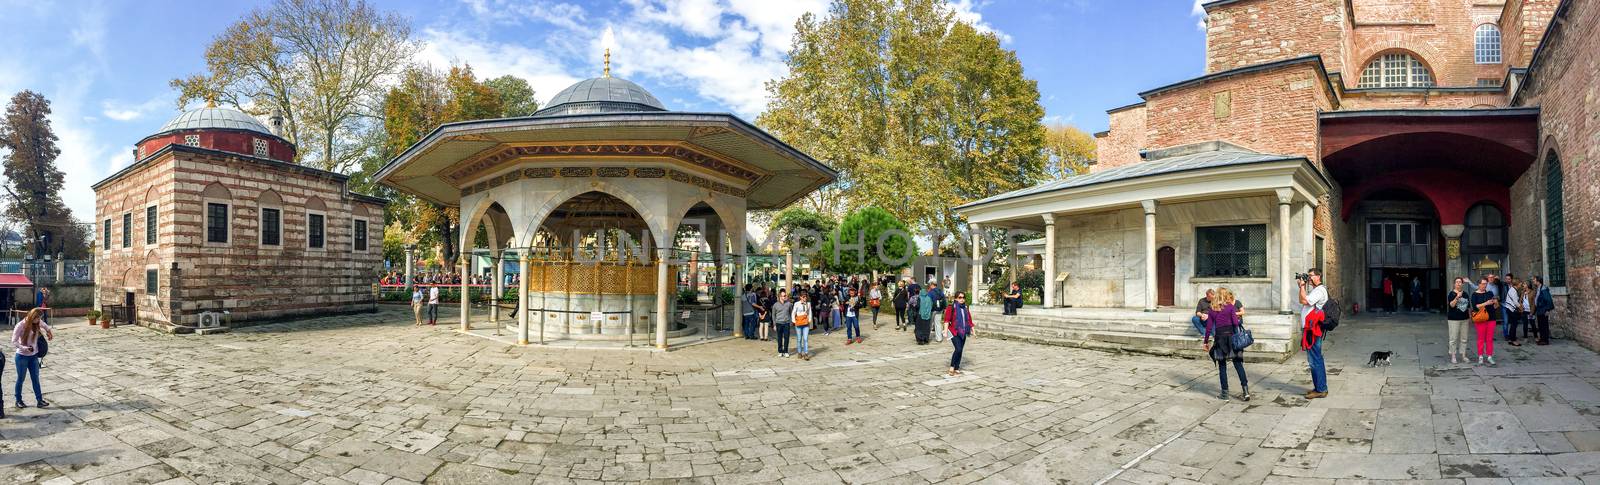 ISTANBUL - SEPTEMBER 21, 2014: Tourists enjoy city life in Sulta by jovannig